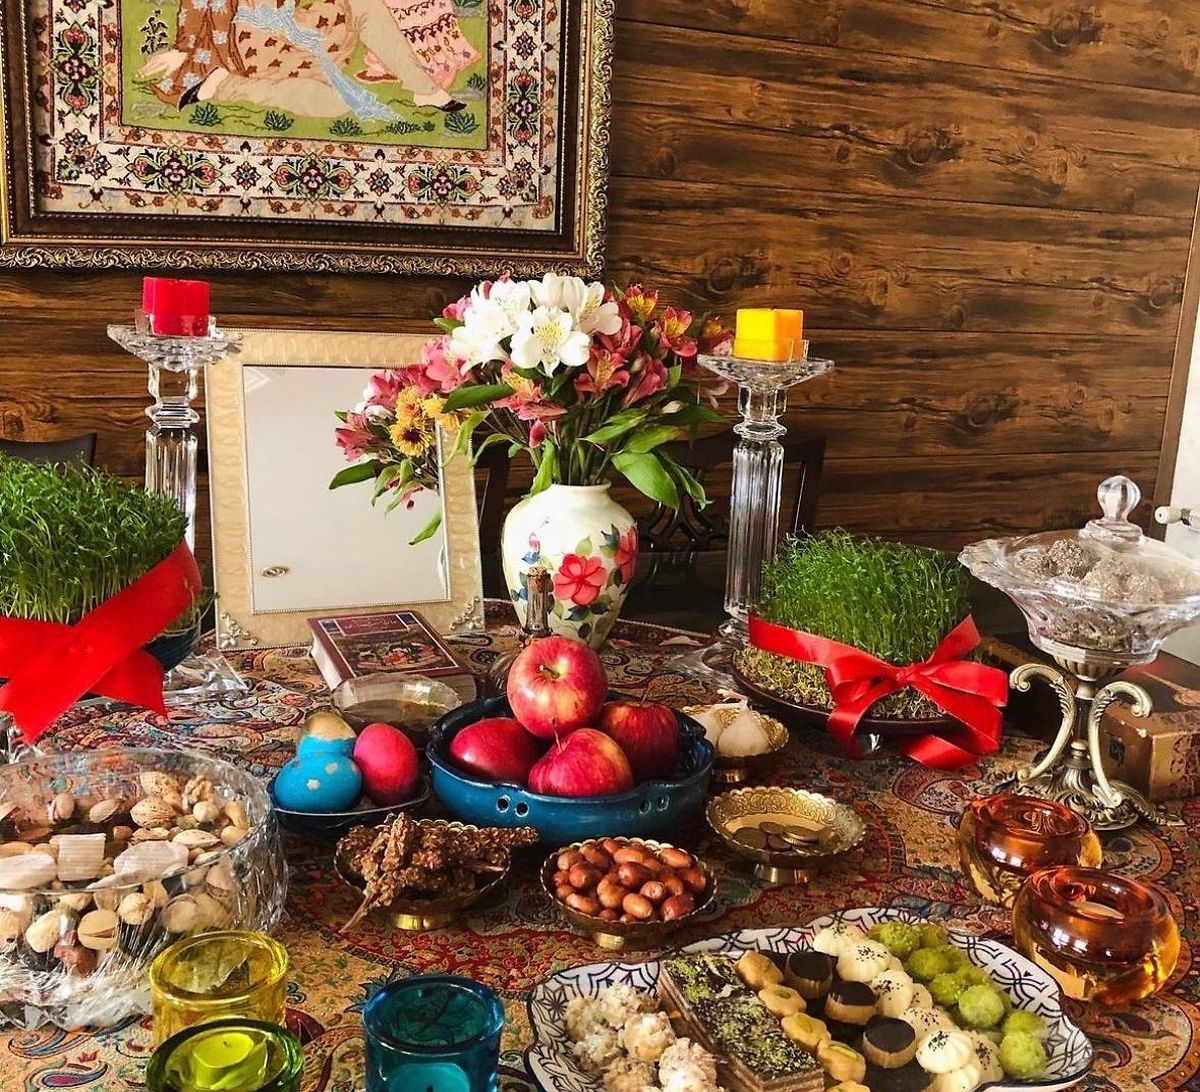 Haft Sin, the table set with symbols of the NoRooz celebration in Iran